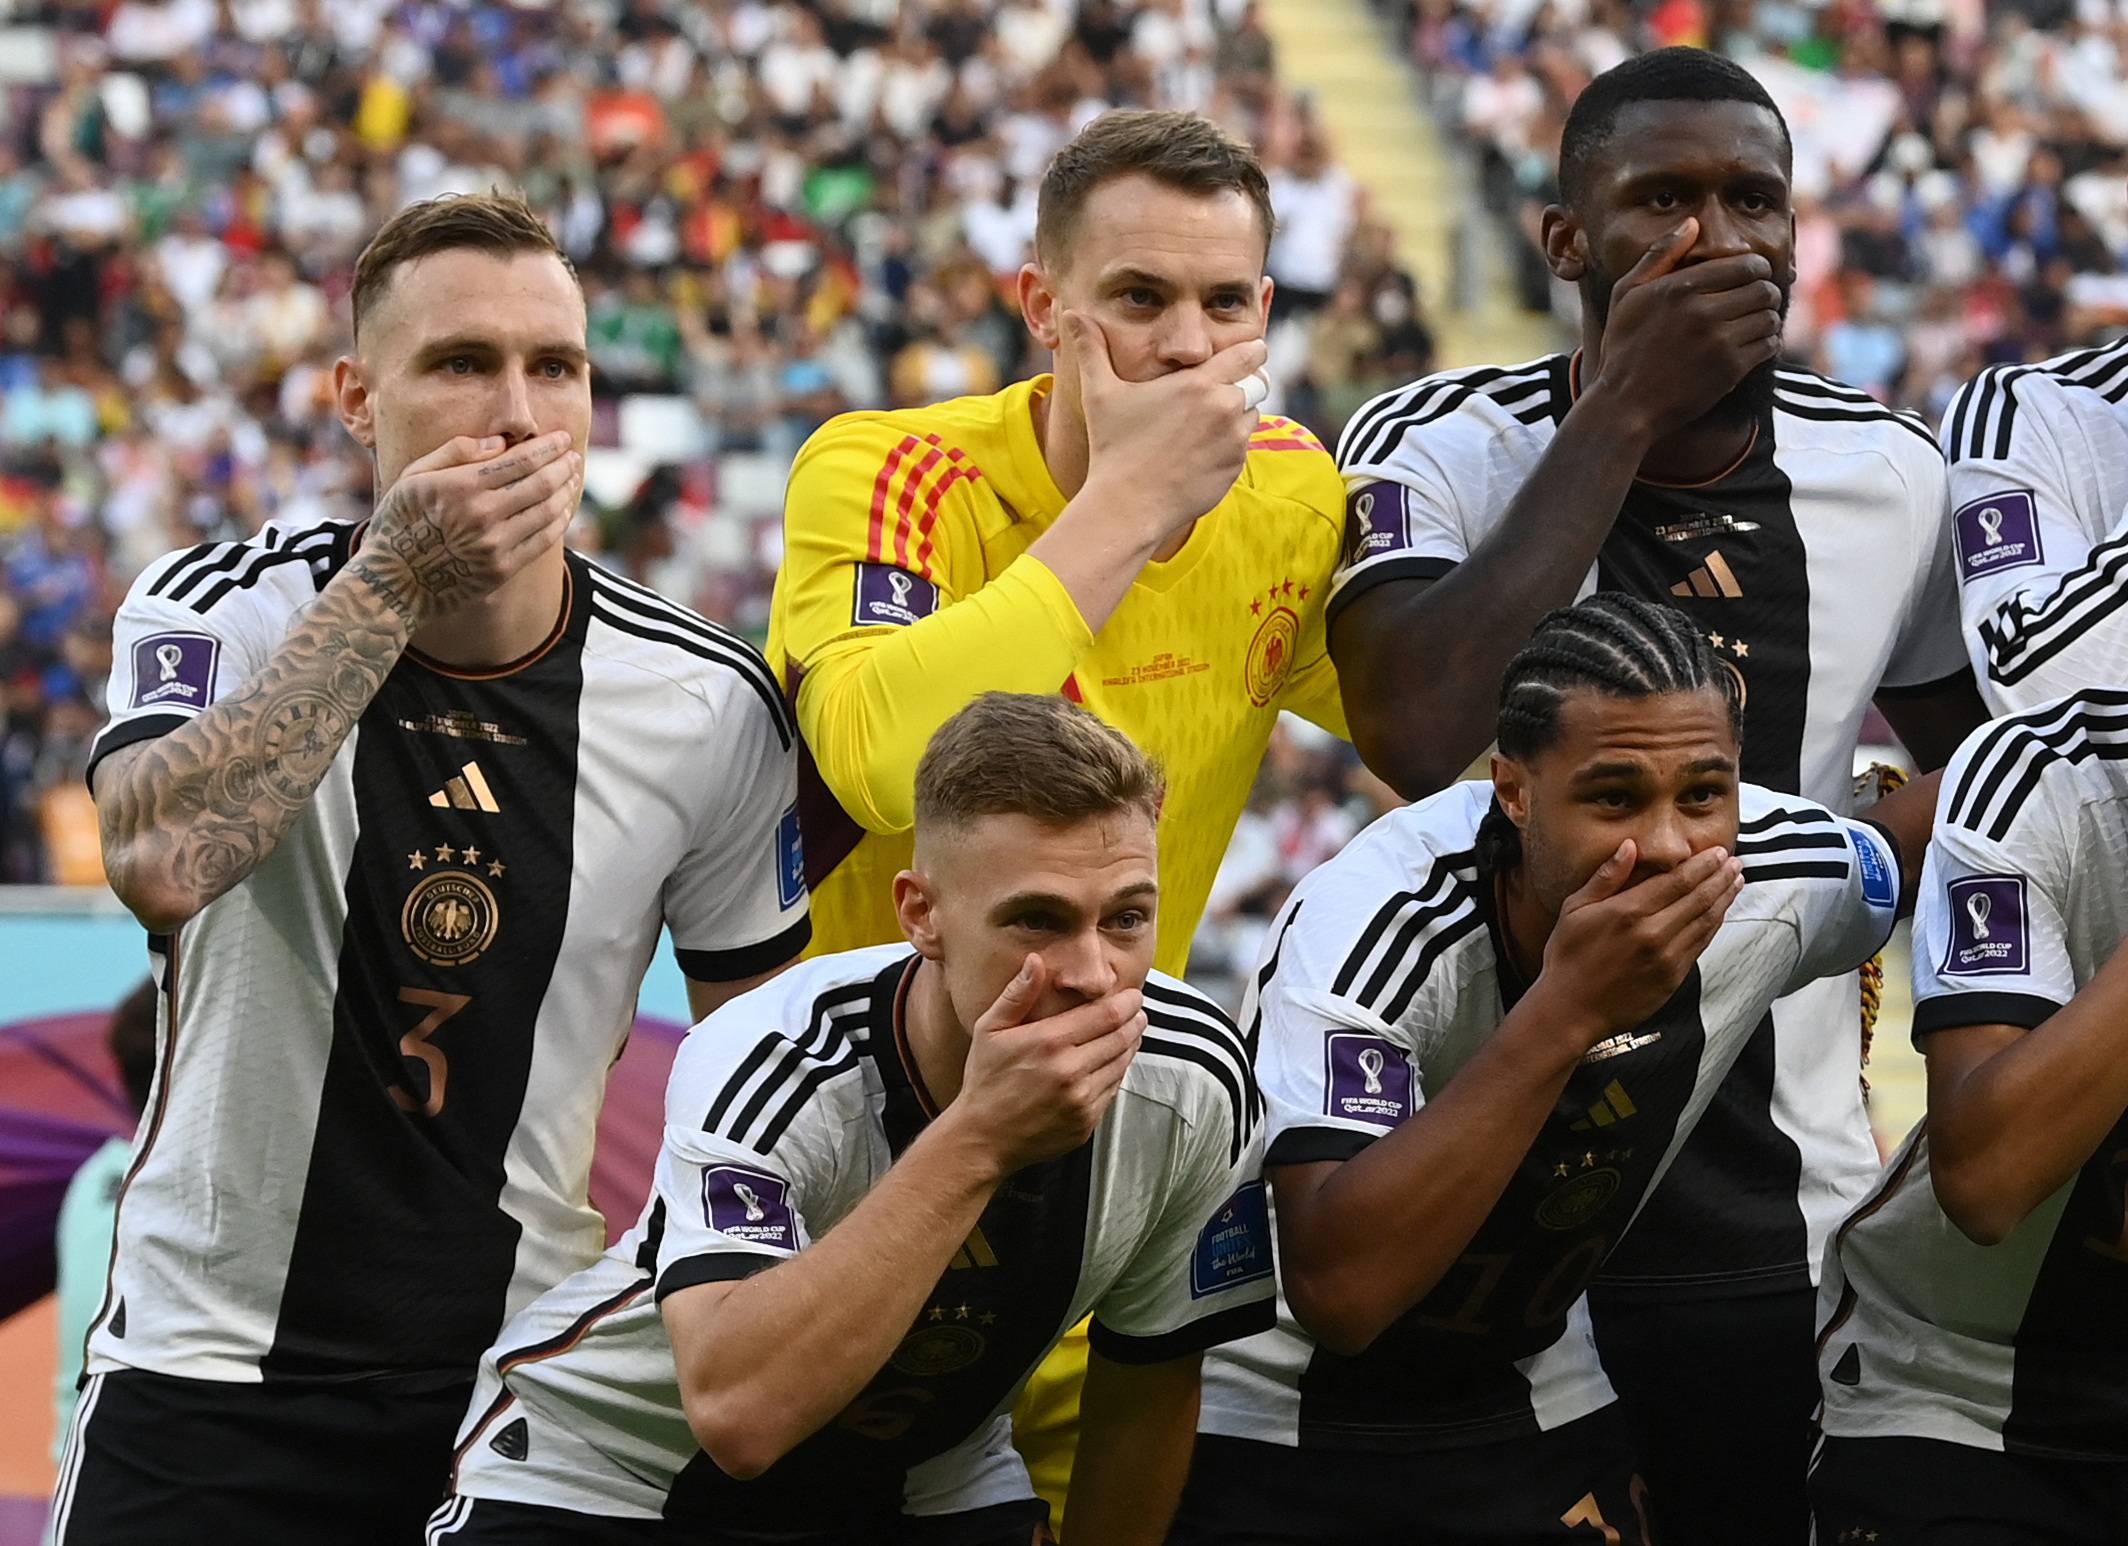 Germany players cover their mouthes.